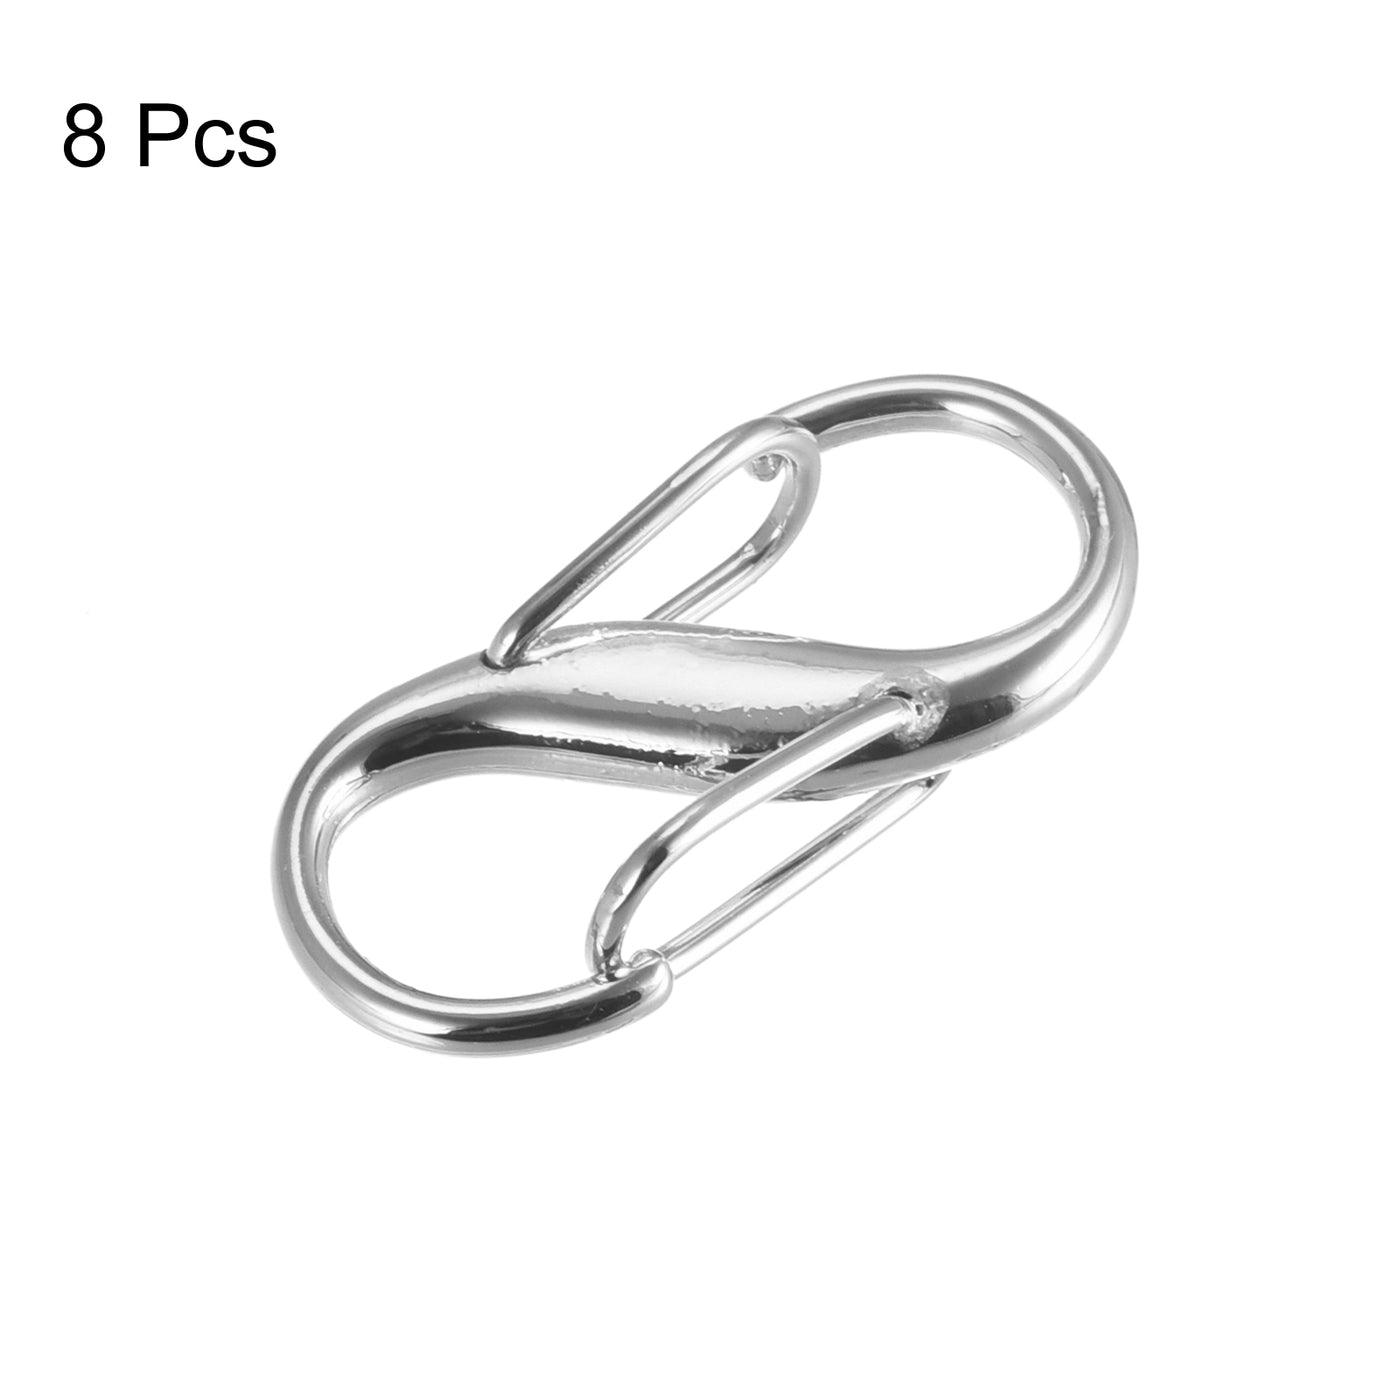 uxcell Uxcell Adjustable Metal Buckle for Chain Strap, 8Pcs 27x13mm Chain Shortener, Silver